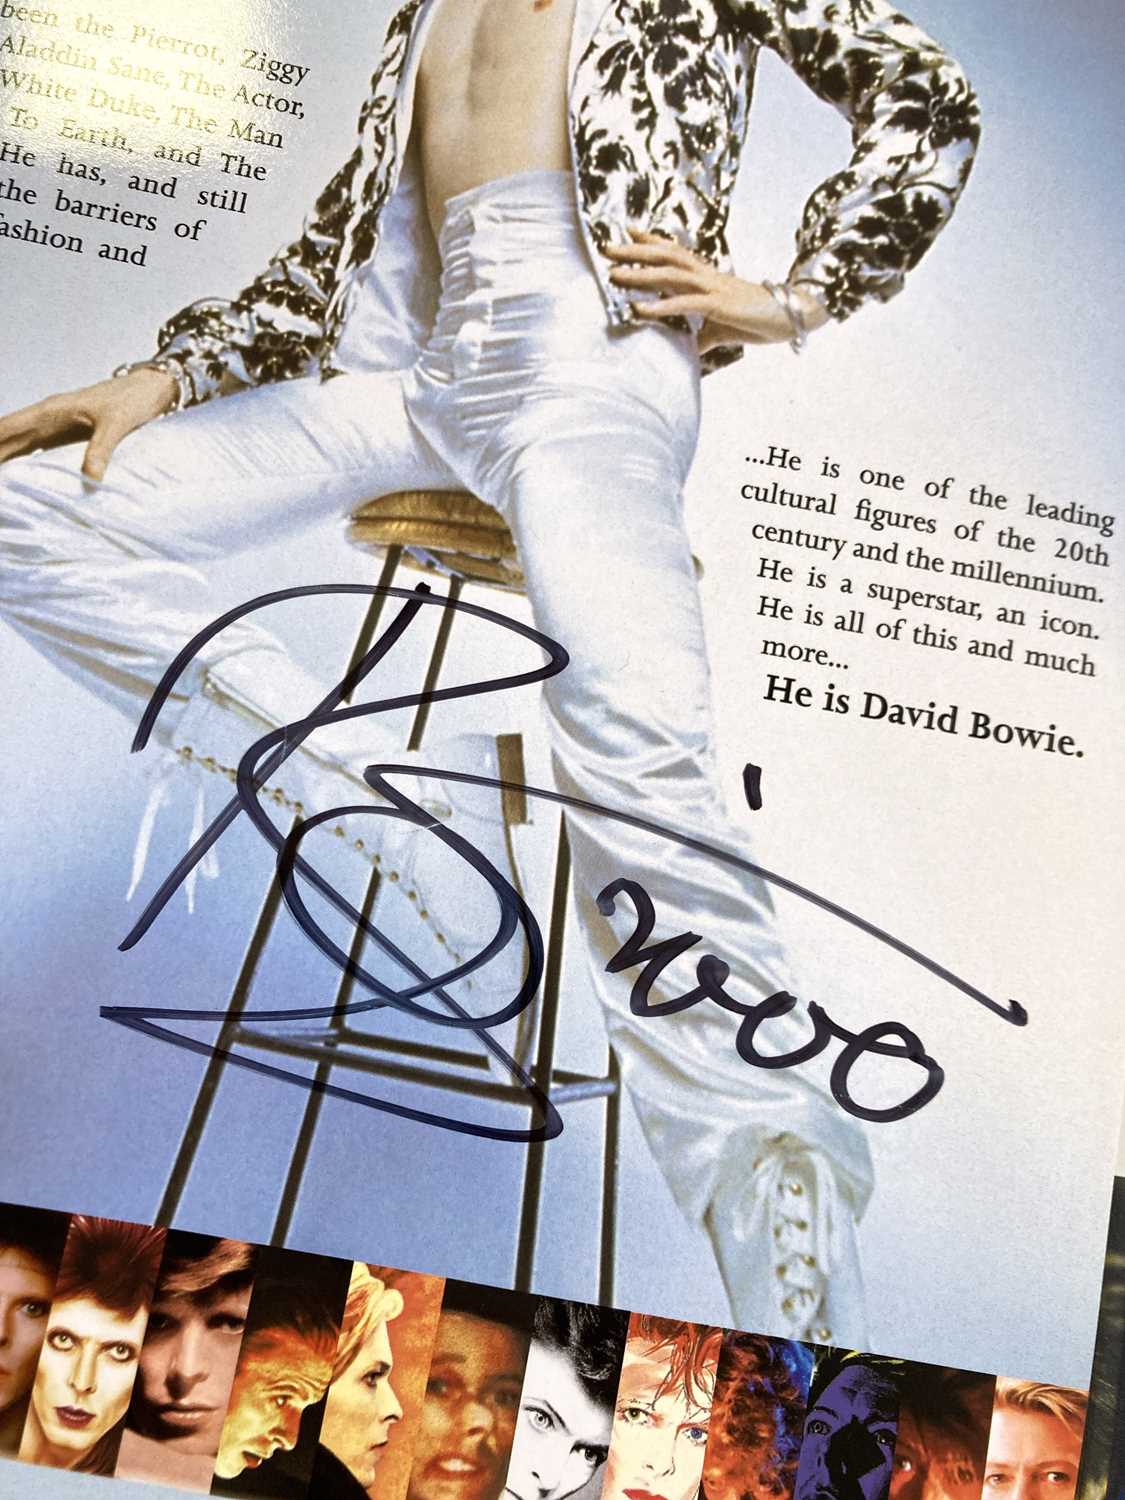 Lot 108 - DAVID BOWIE - SIGNED BOOKLET.